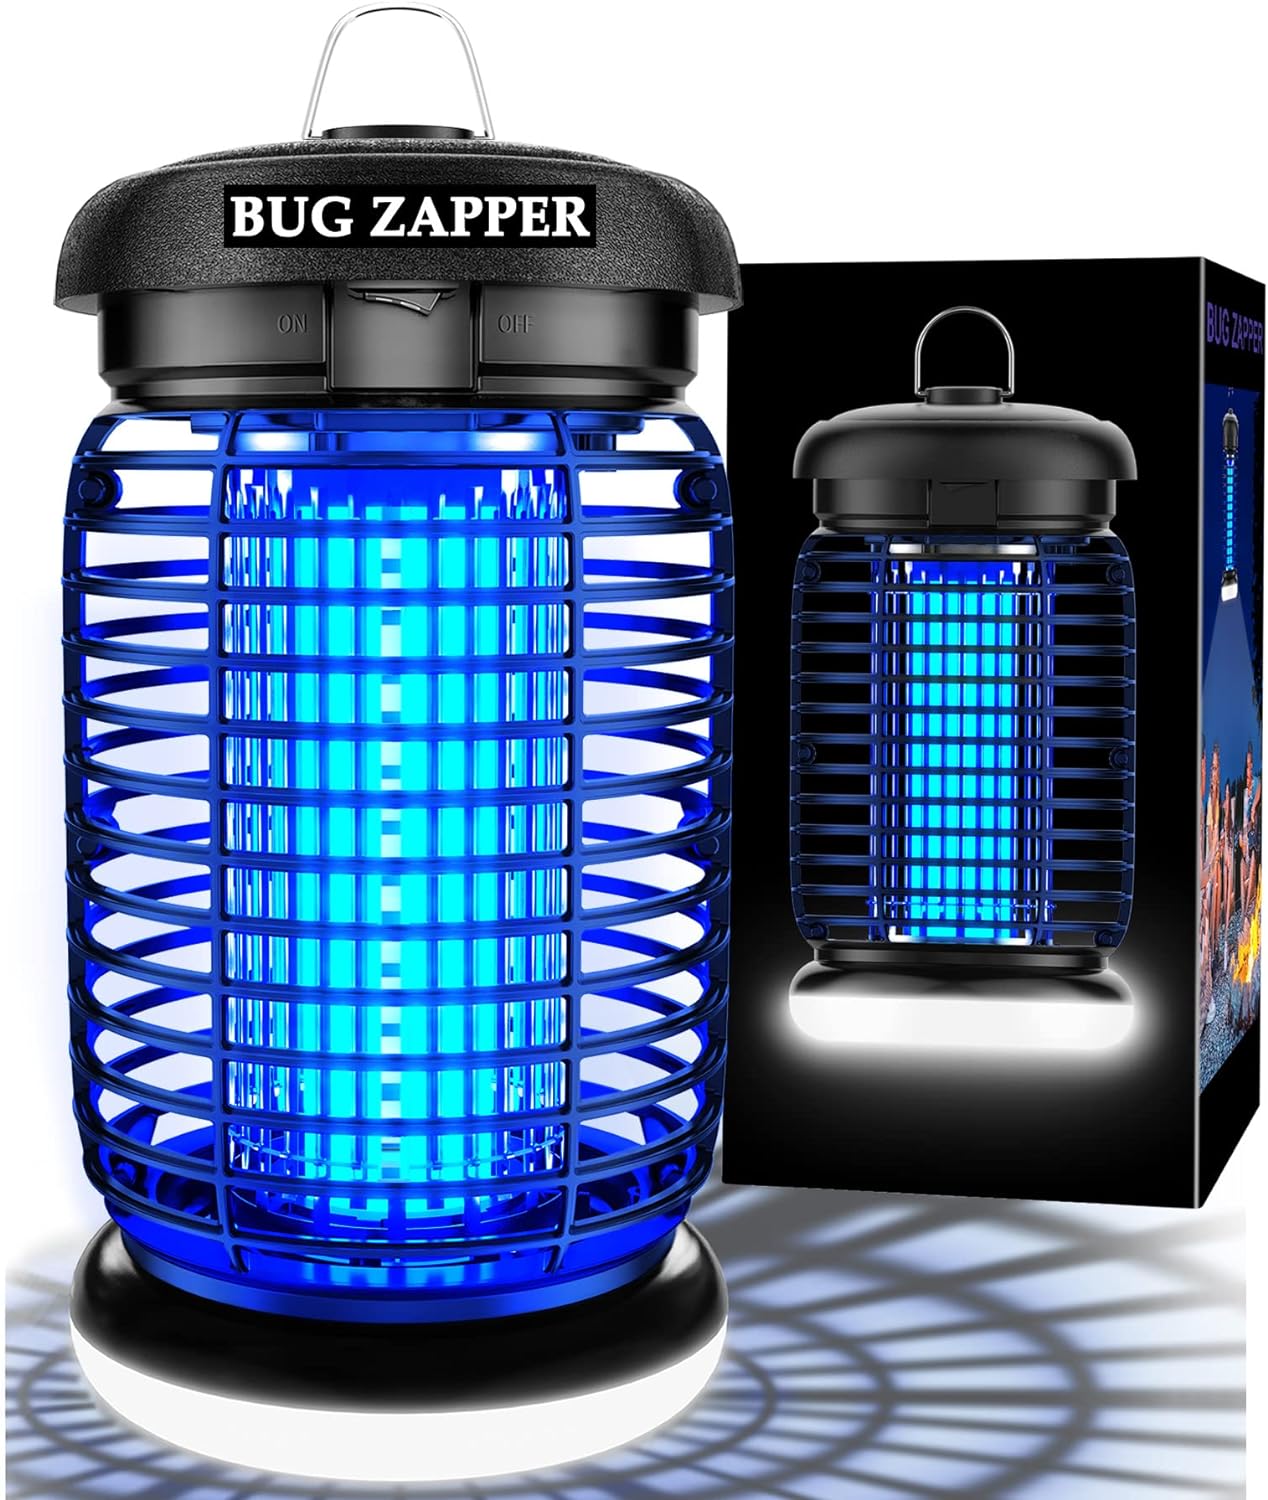 Bug Zapper Outdoor, Mosquito Zapper with LED Light, Fly Zapper Outdoor Indoor, Insect Zapper Electric Fly Traps, Plug in Mosquito Killer for Patio Yard